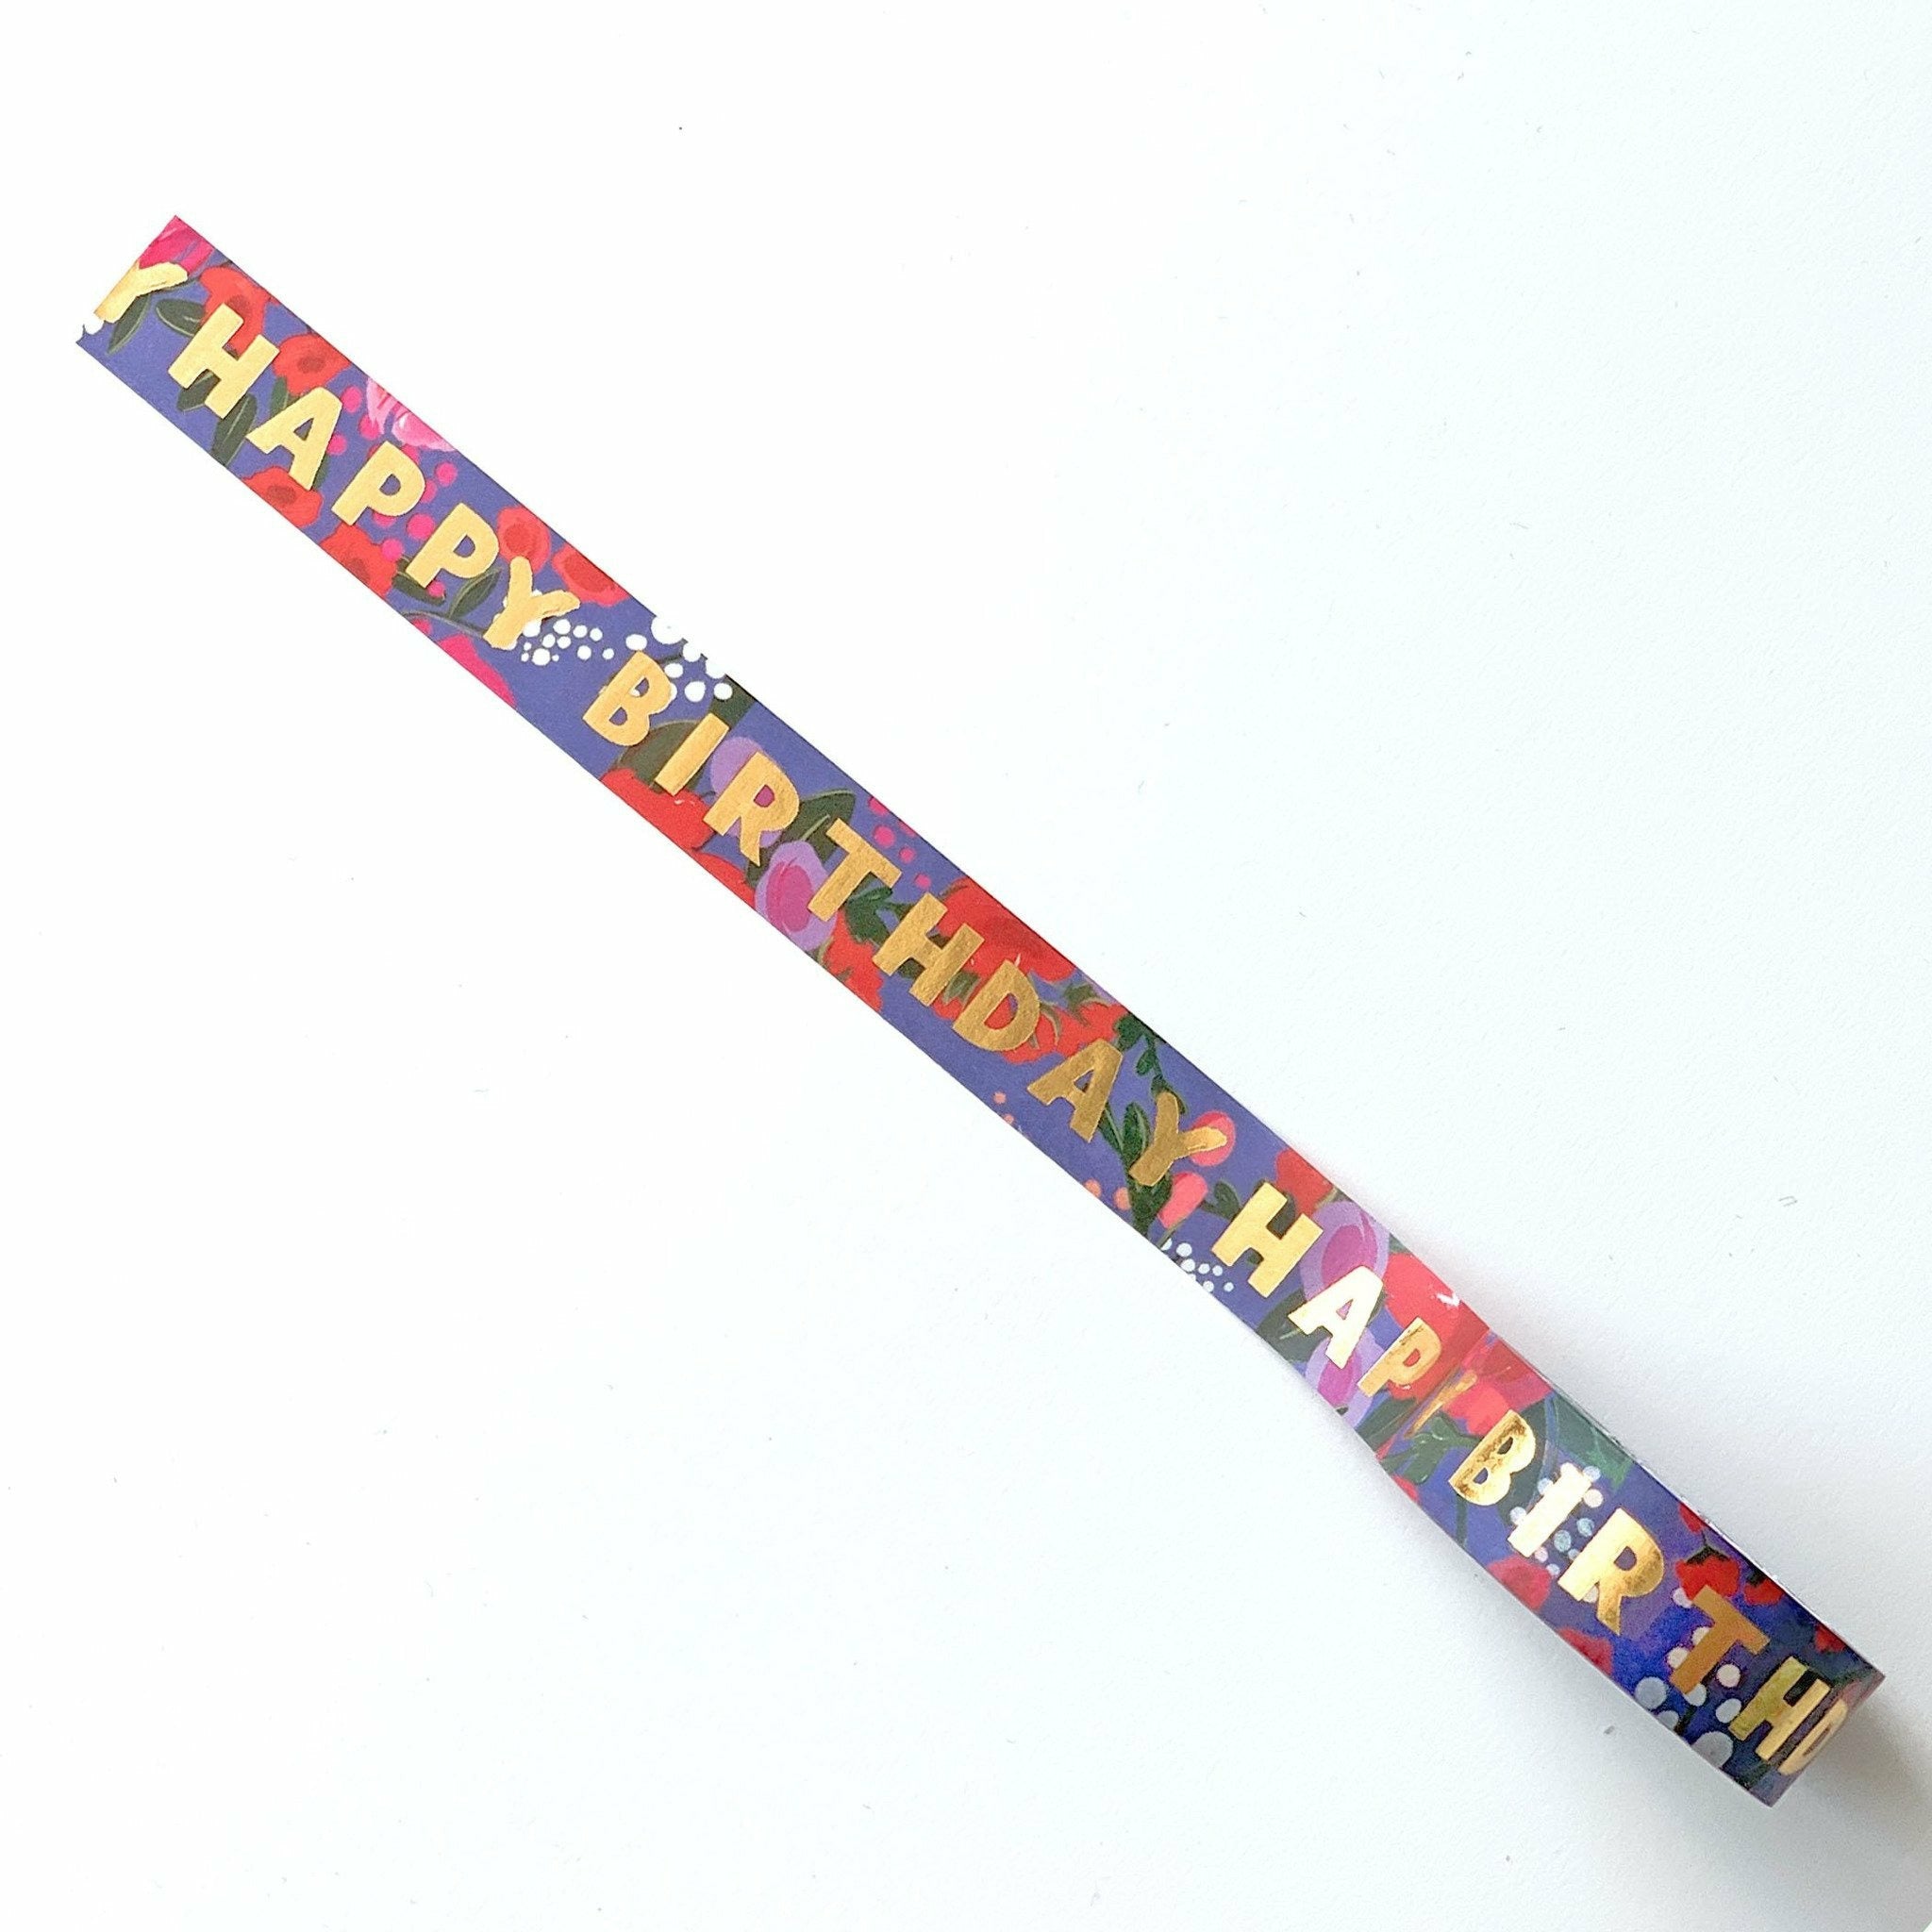 Gold Metallic Happy Birthday Washi Tape with Colorful Flowers - The First Snow